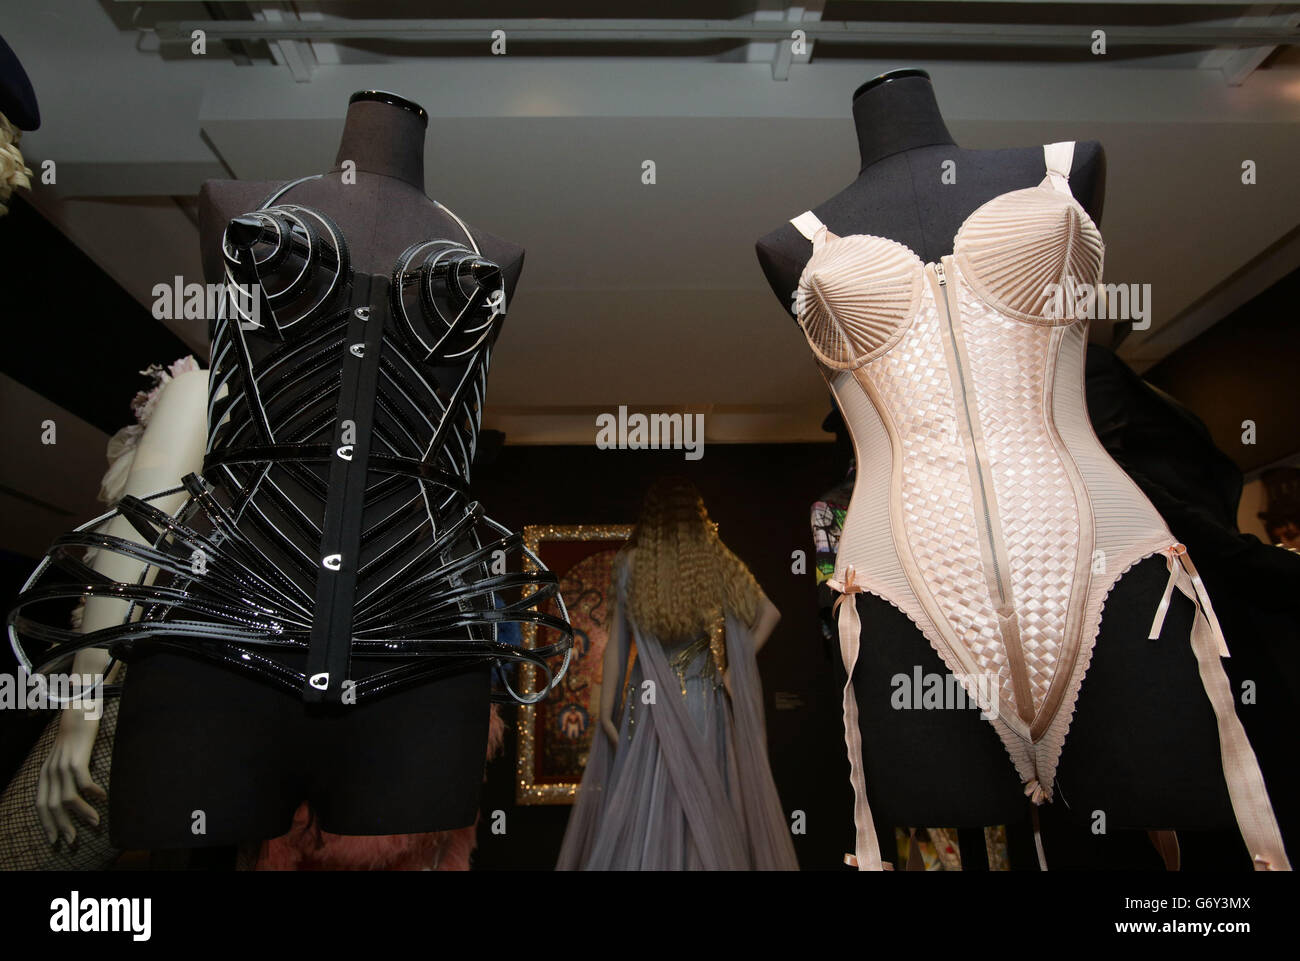 The clothes on display during a media view of 'The Fashion World of Jean Paul Gaultier: From the Sidewalk to the Catwalk' - the first major exhibition devoted to the celebrated French couturier, including costumes for film and performance including the conical bra and corsets Madonna wore during her 1990 Blond Ambition World Tour, stage costumes designed for Kylie Minogue as well as pieces created for the films of Pedro Almodovar among others - at Barbican Art Gallery in London. Stock Photo